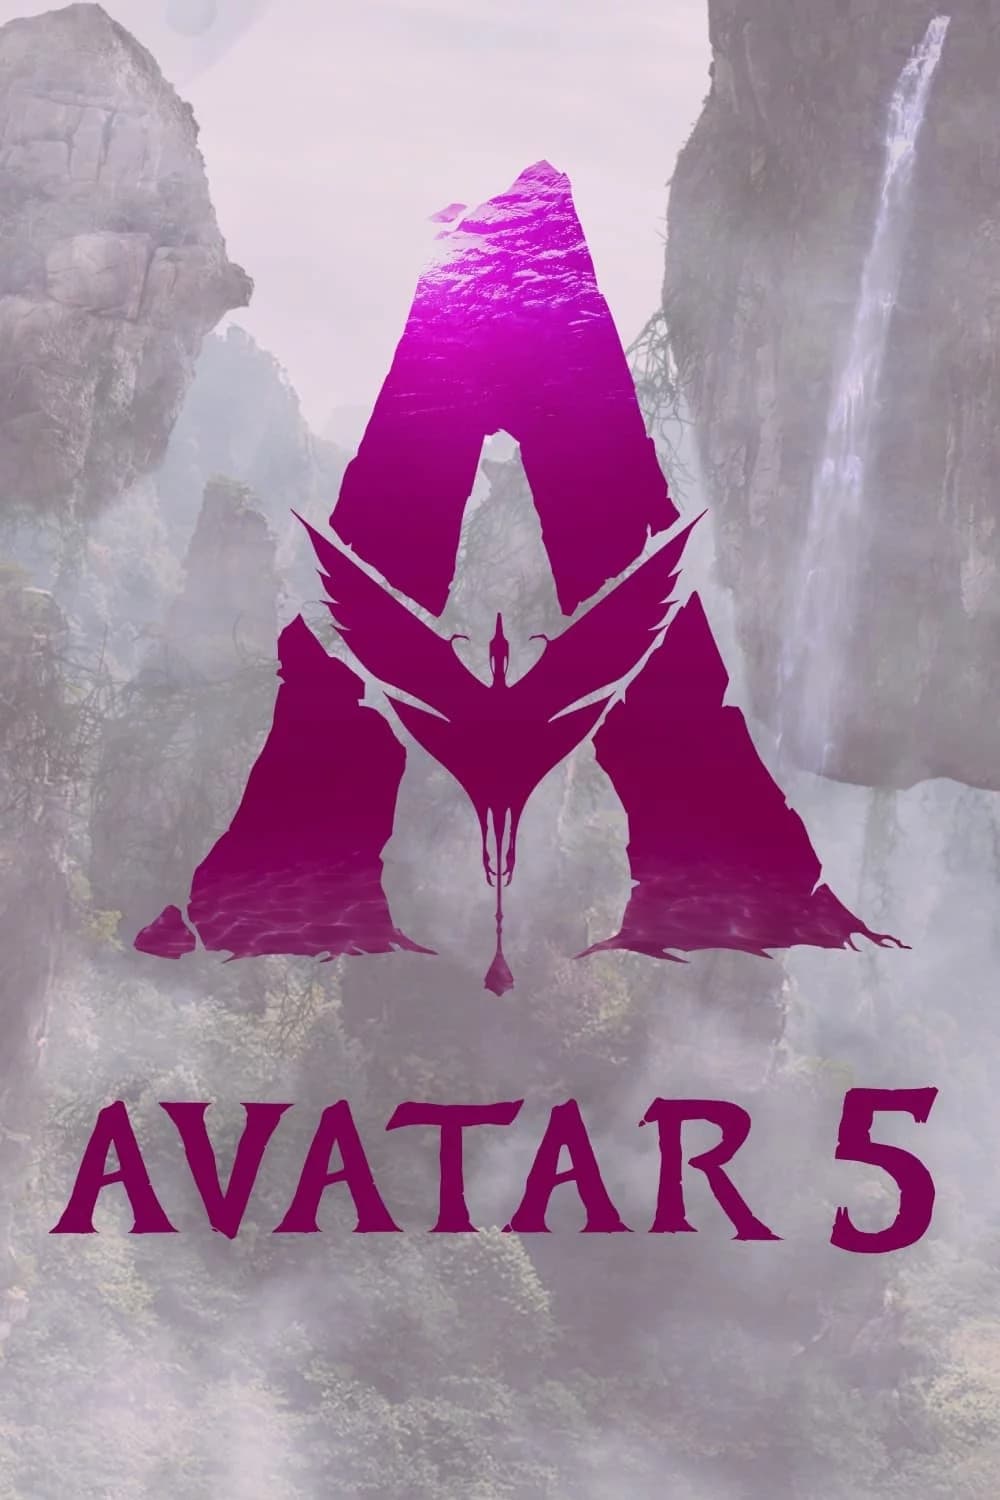 Poster for the movie "Avatar 5"